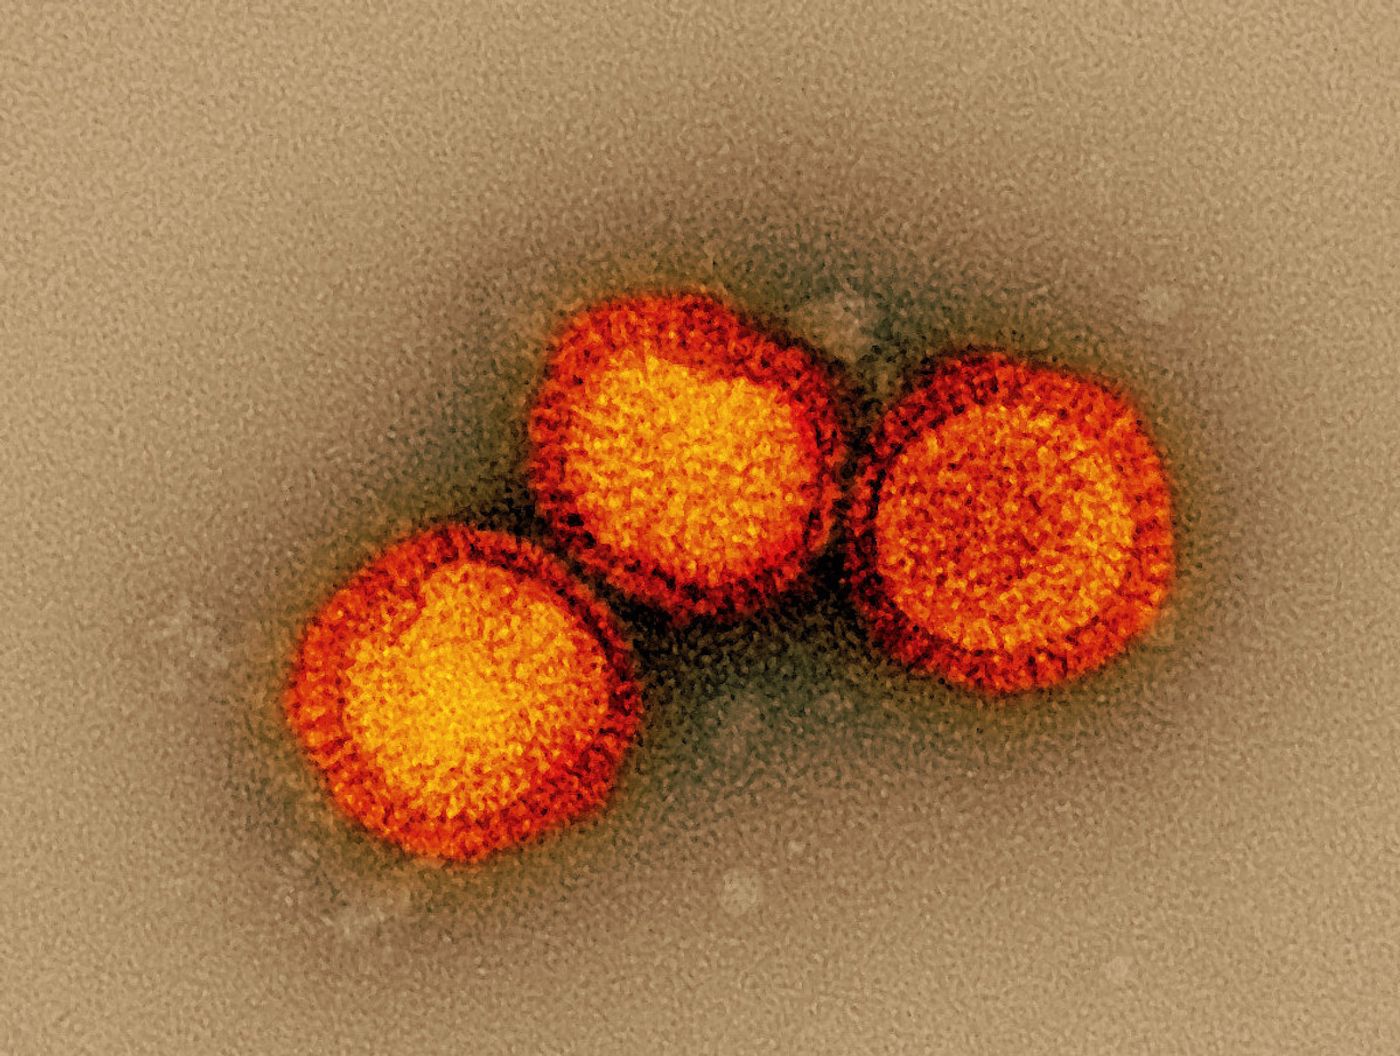 Influenza B virus particles, colorized orange, isolated from a patient sample and then propagated in cell culture. Both influenza A and B can cause seasonal flu; however, unlike influenza A virus, which can also infect animals, influenza B only infects humans. Microscopy by John Gallagher and Audray Harris, NIAID Laboratory of Infectious Diseases. Credit: NIAID